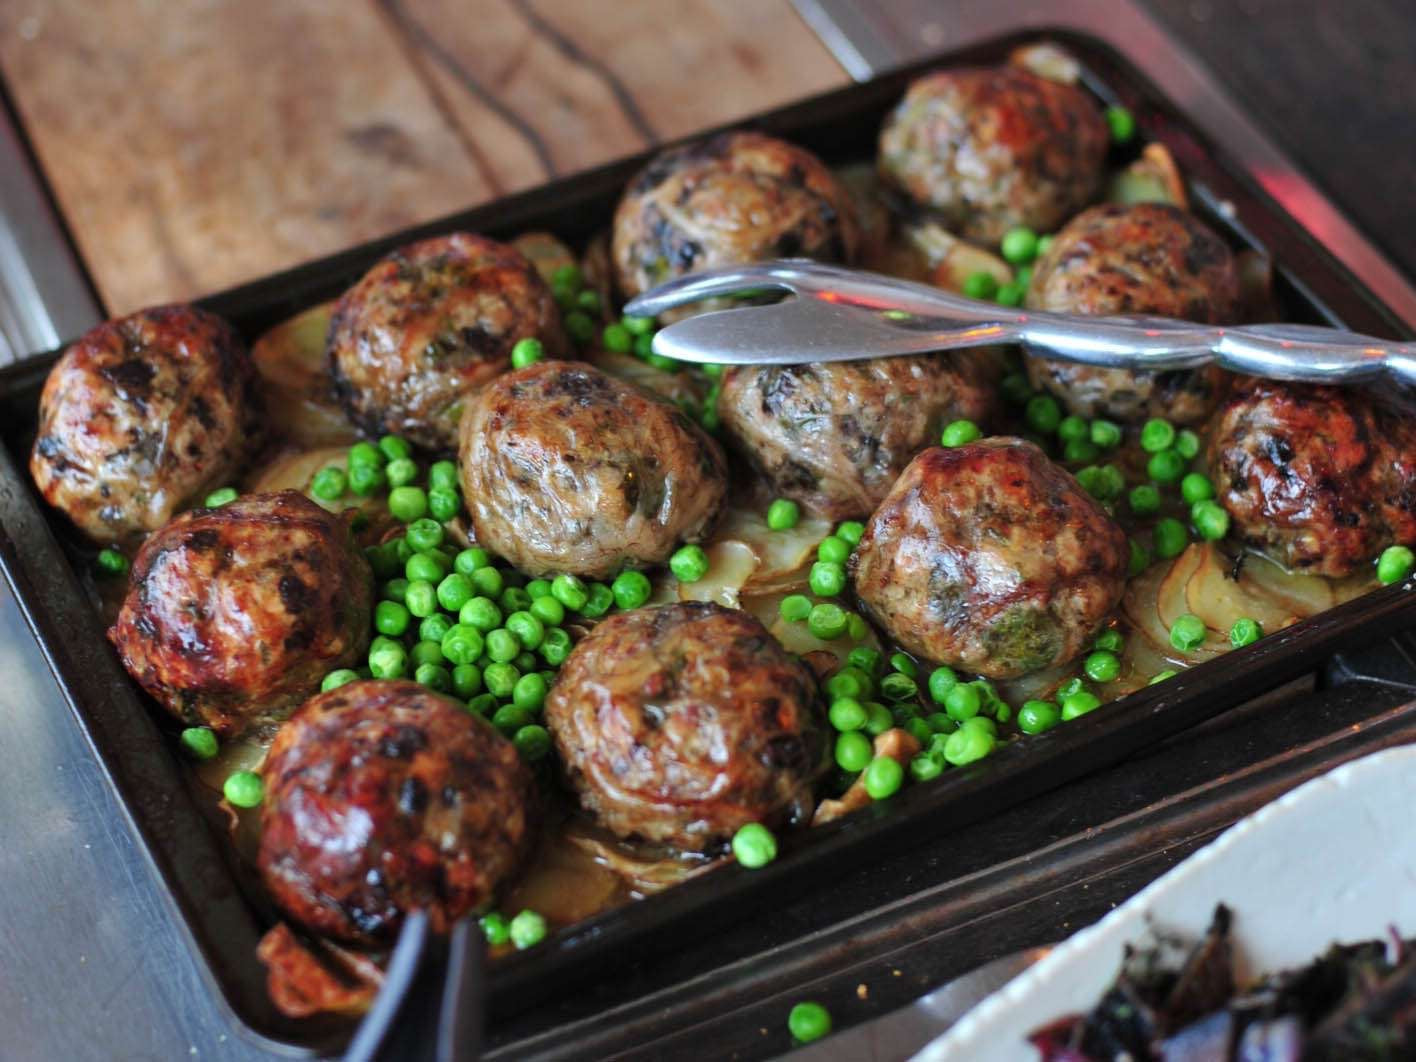 The Modern Meat Plant-Based Meat Balls